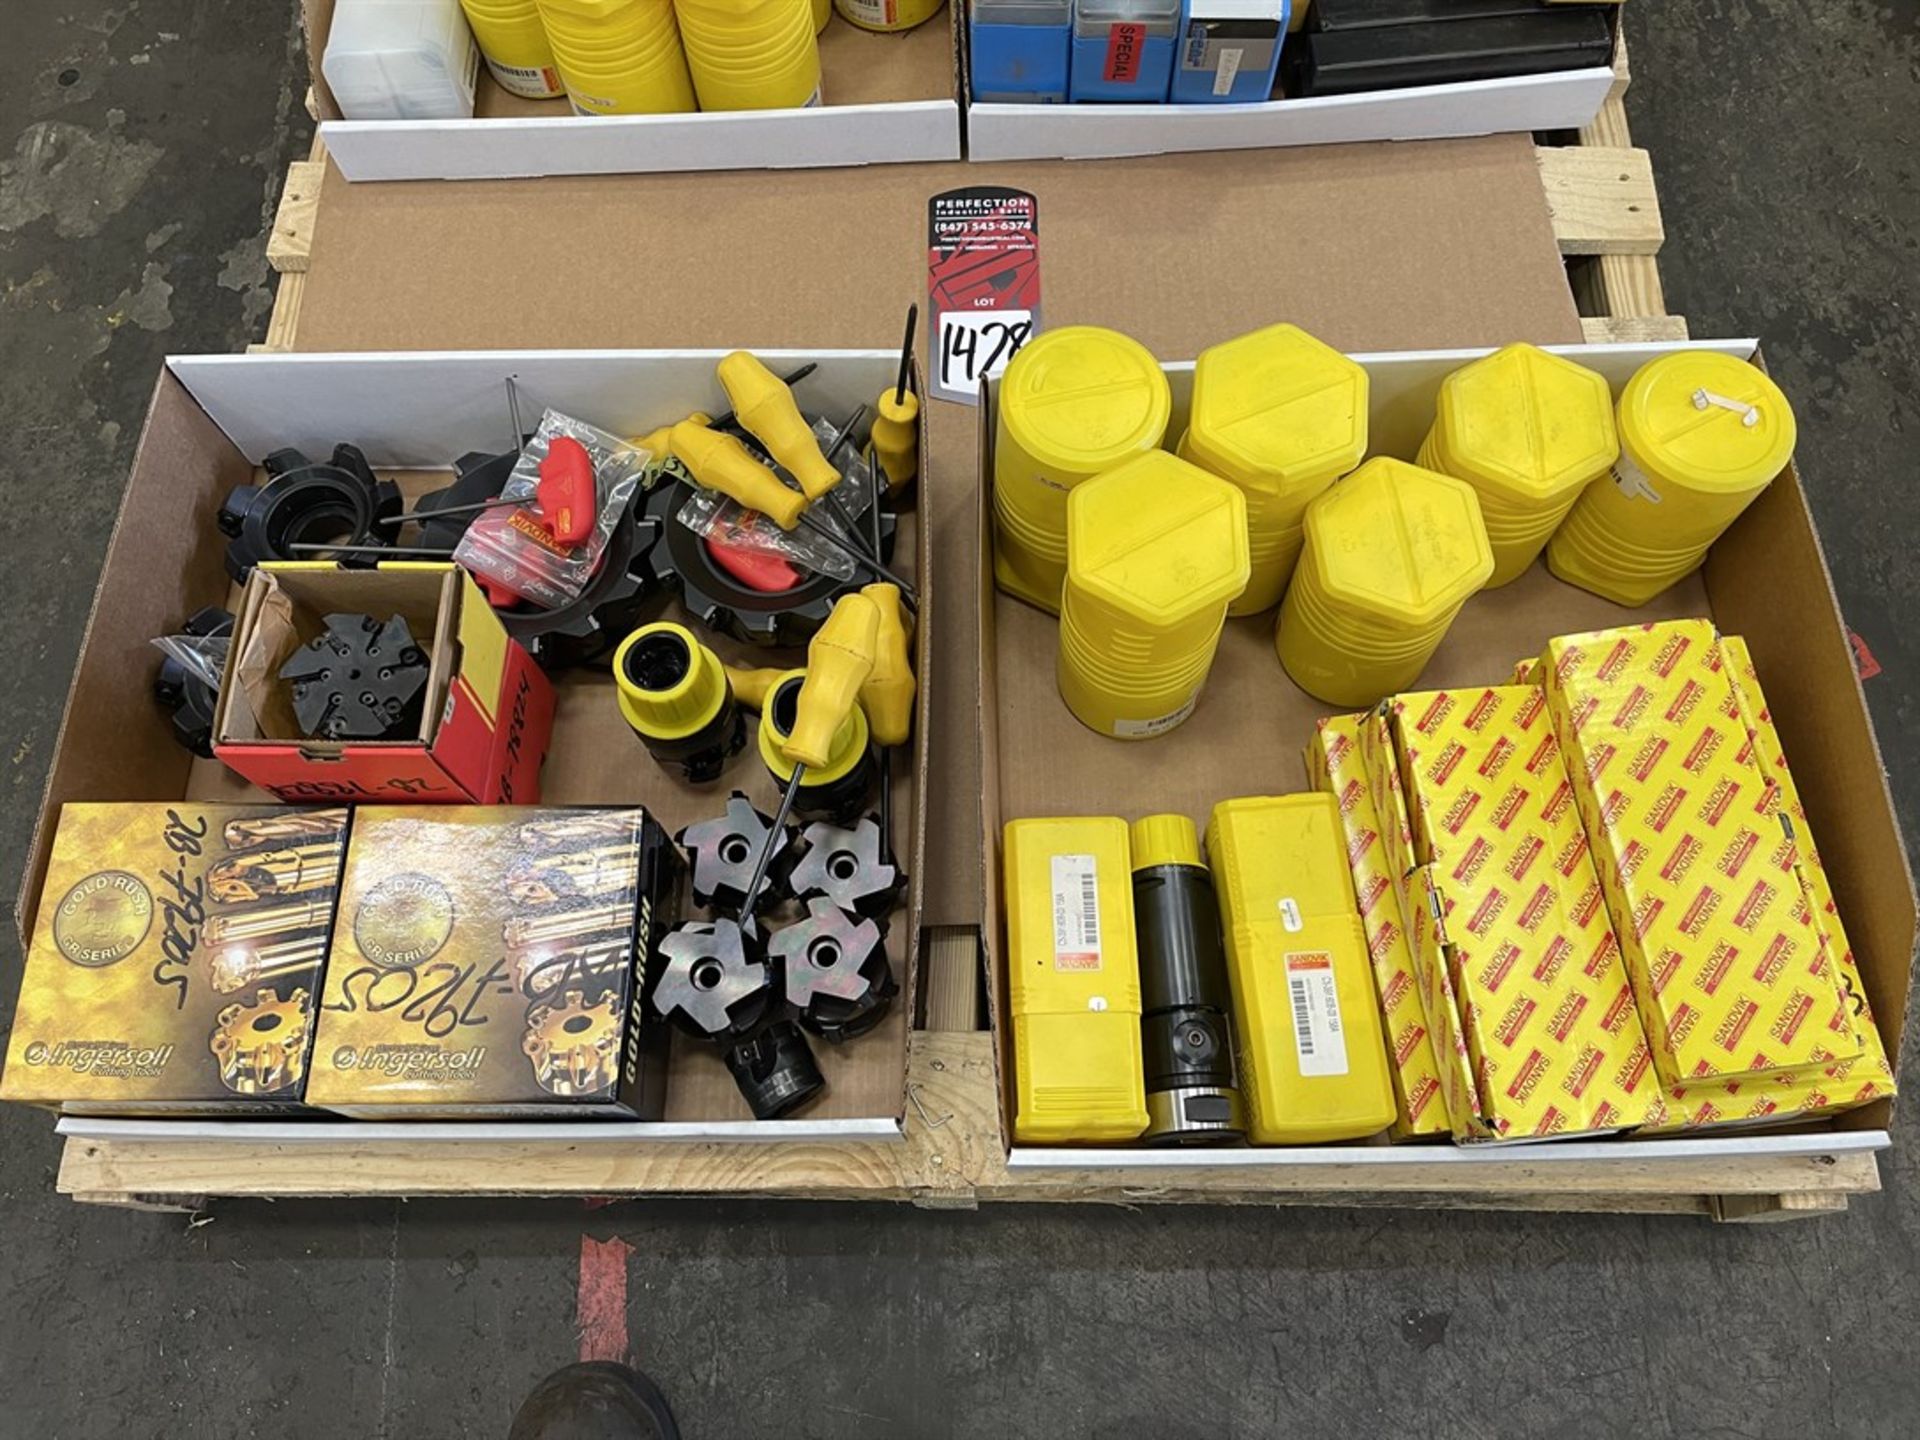 Lot of Assorted Face Mills, Capto C5 Tooling, and Iscar and Kennametal Tooling - Image 2 of 3